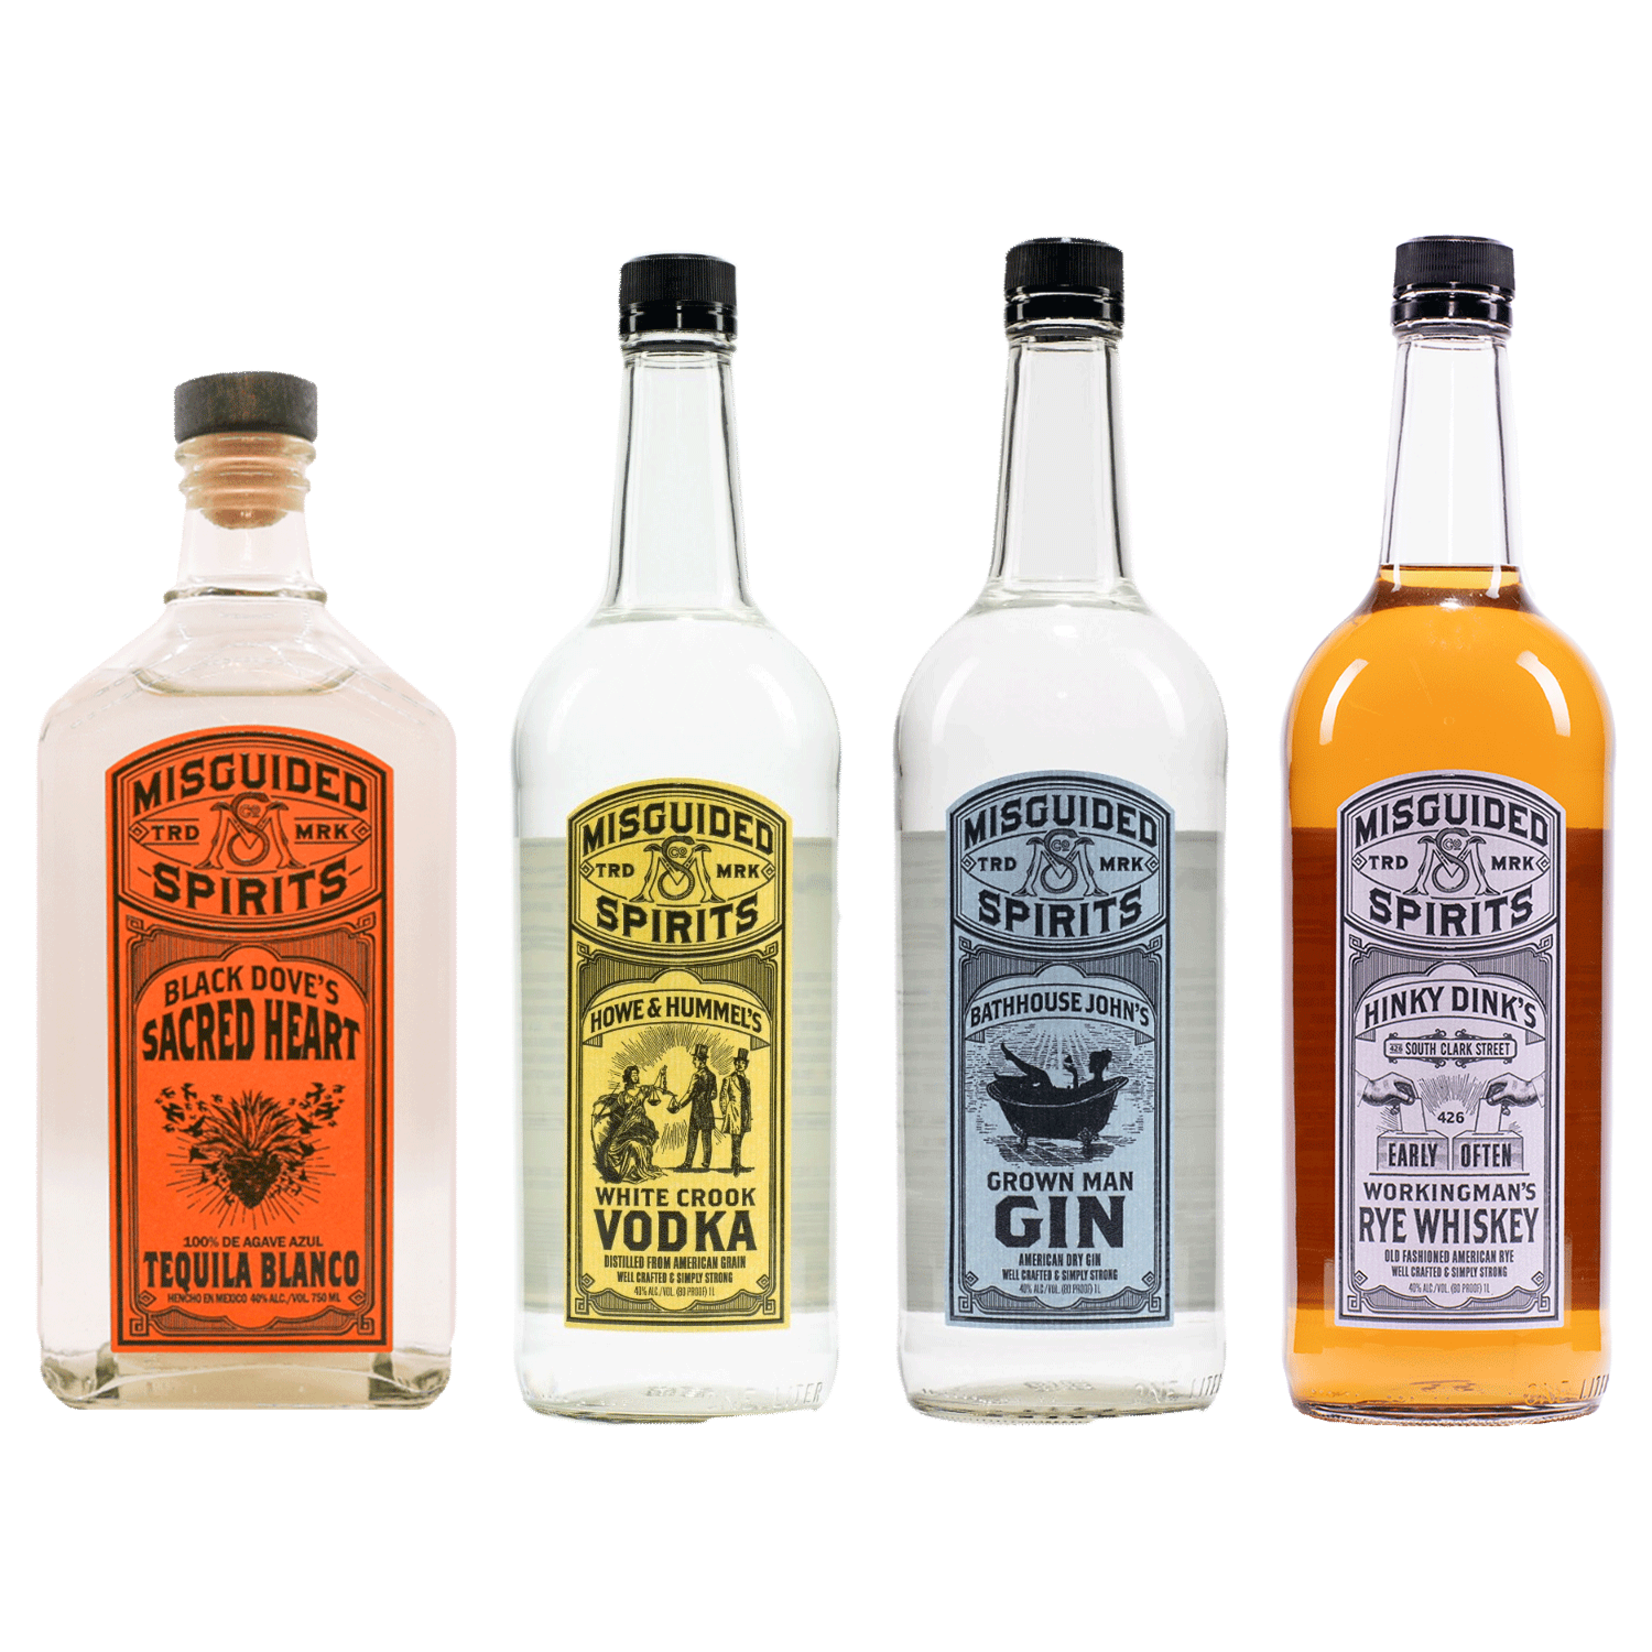 Spirits Misguided Spirits Combo 4-Pack one bottle each Tequila 1L, Vodka 1L, Gin 1L, Rye 1L in Royal Tote Bag